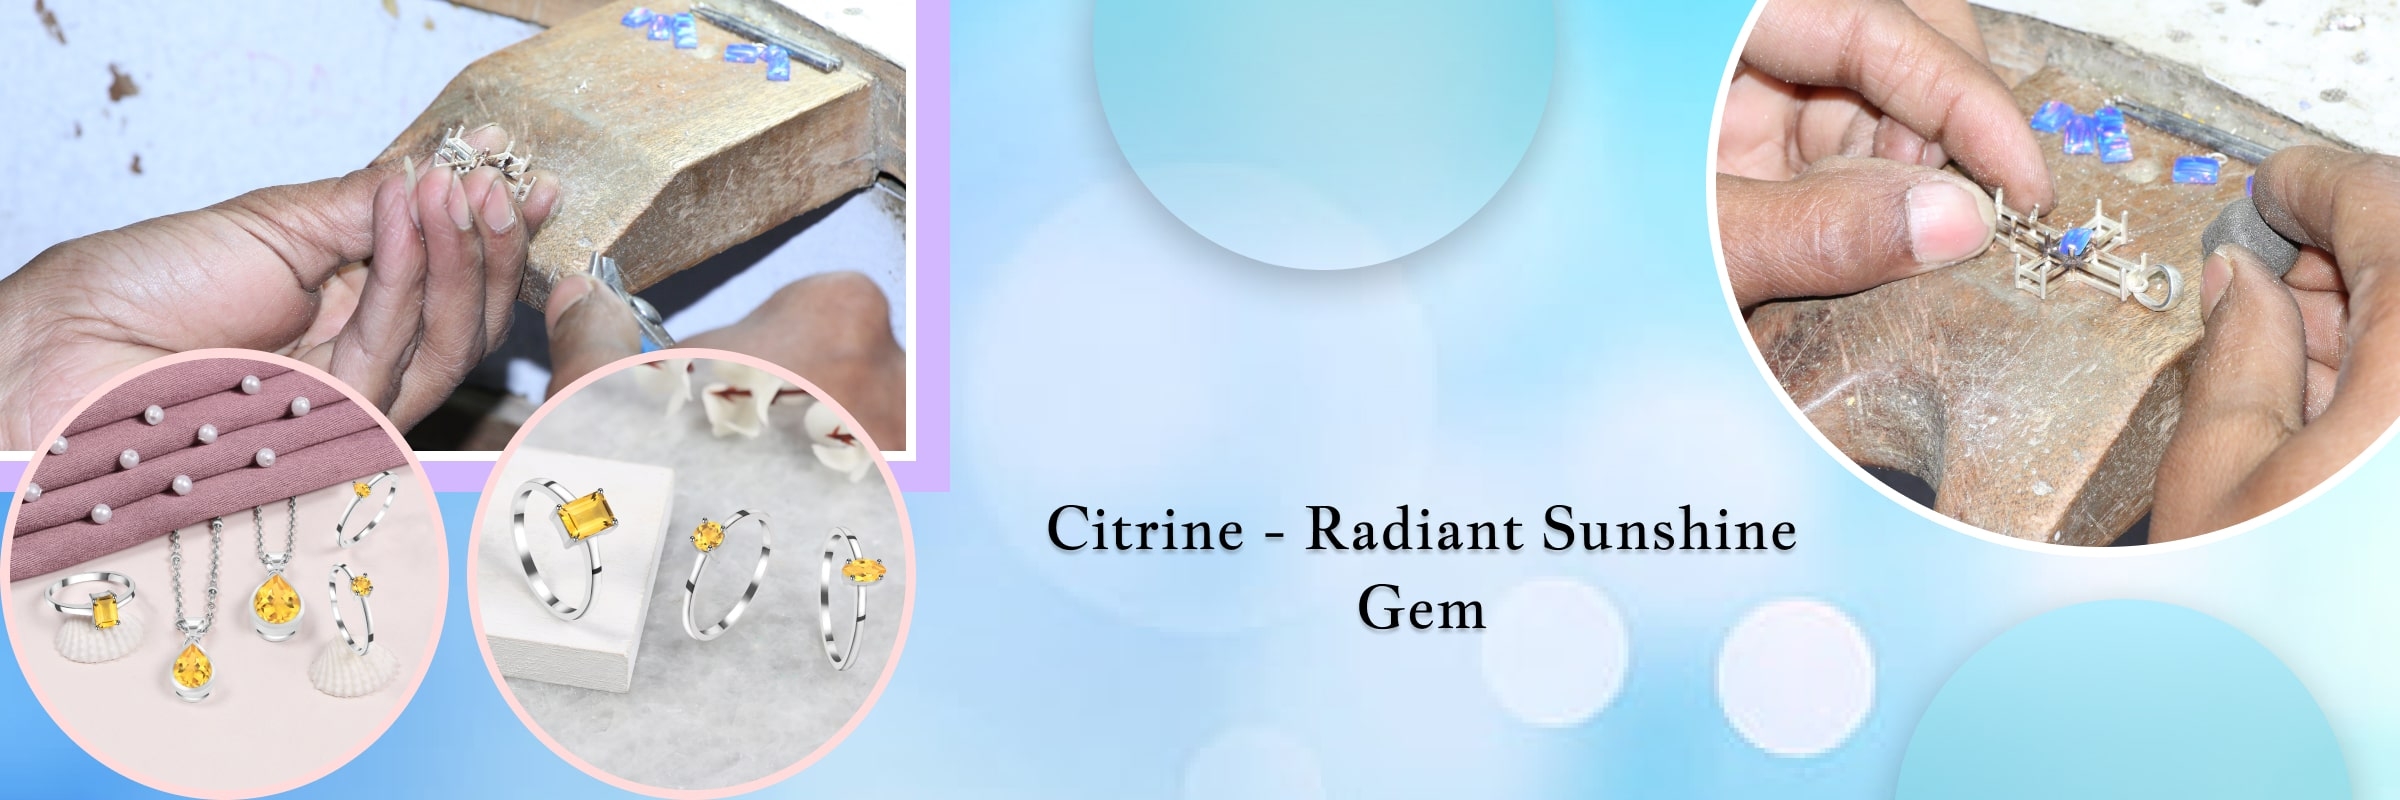 What is Citrine